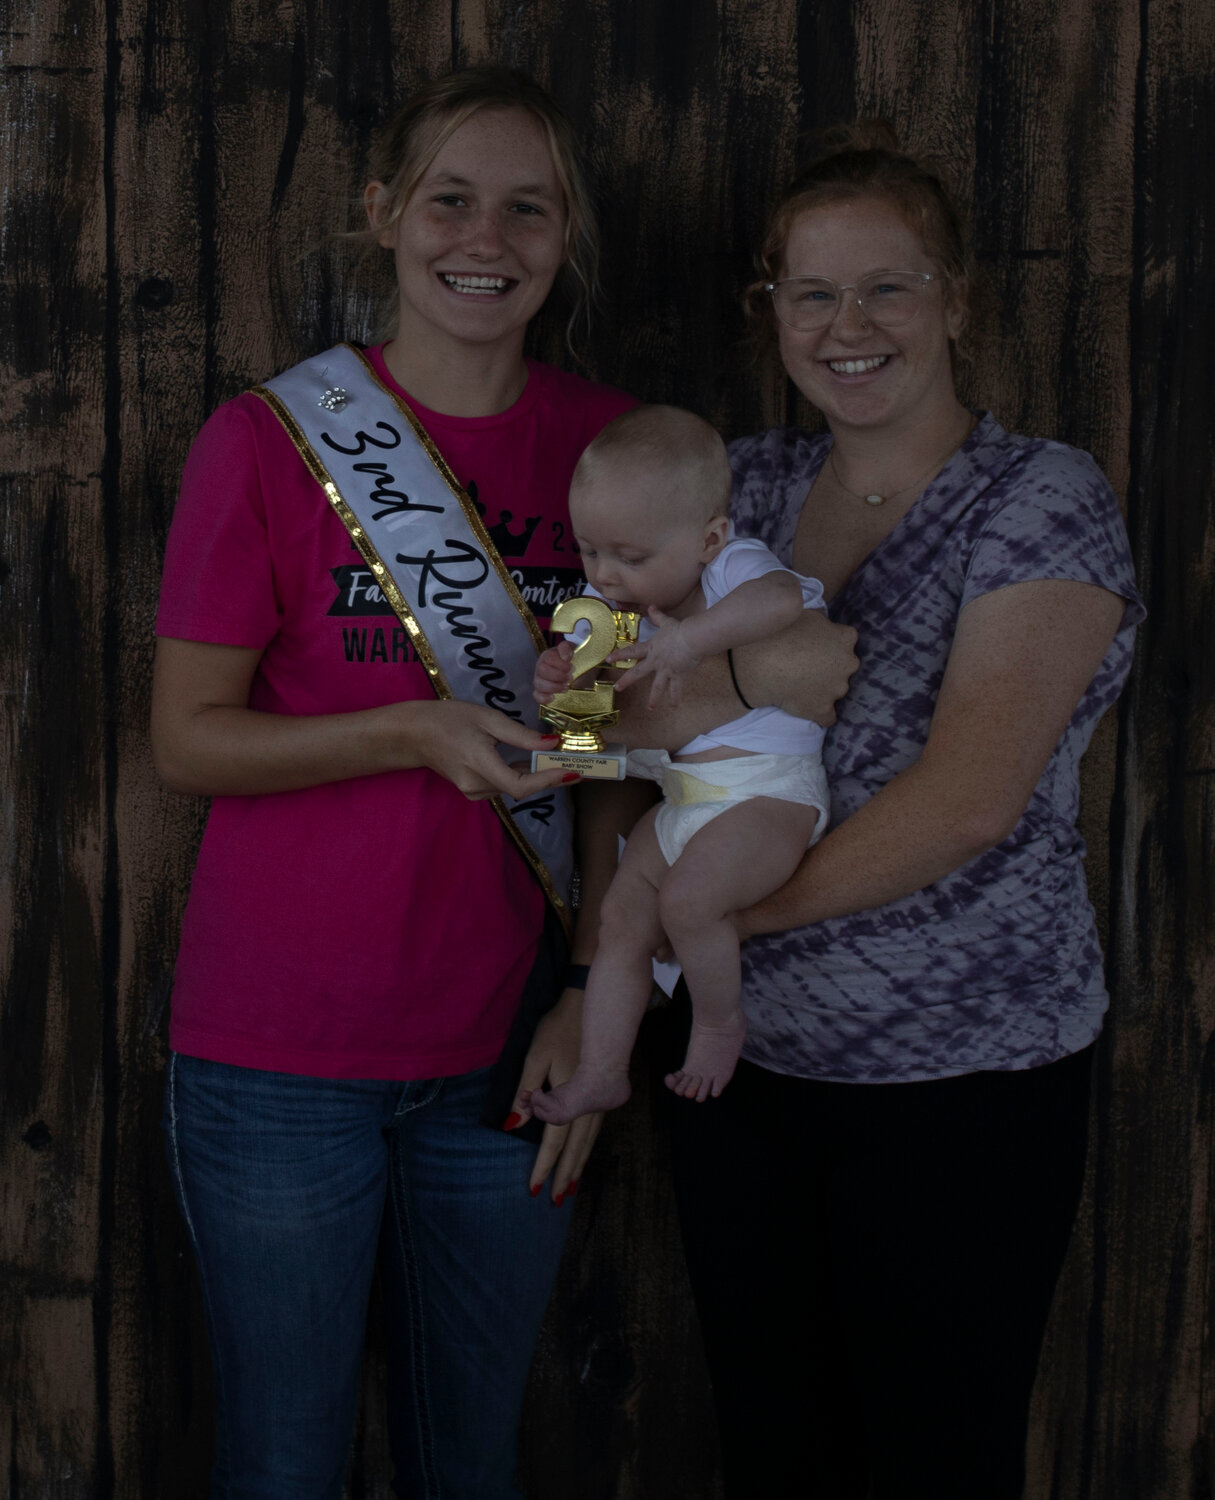 6-9 MOS SECOND PLACE: LUCY MCCAFFERTY